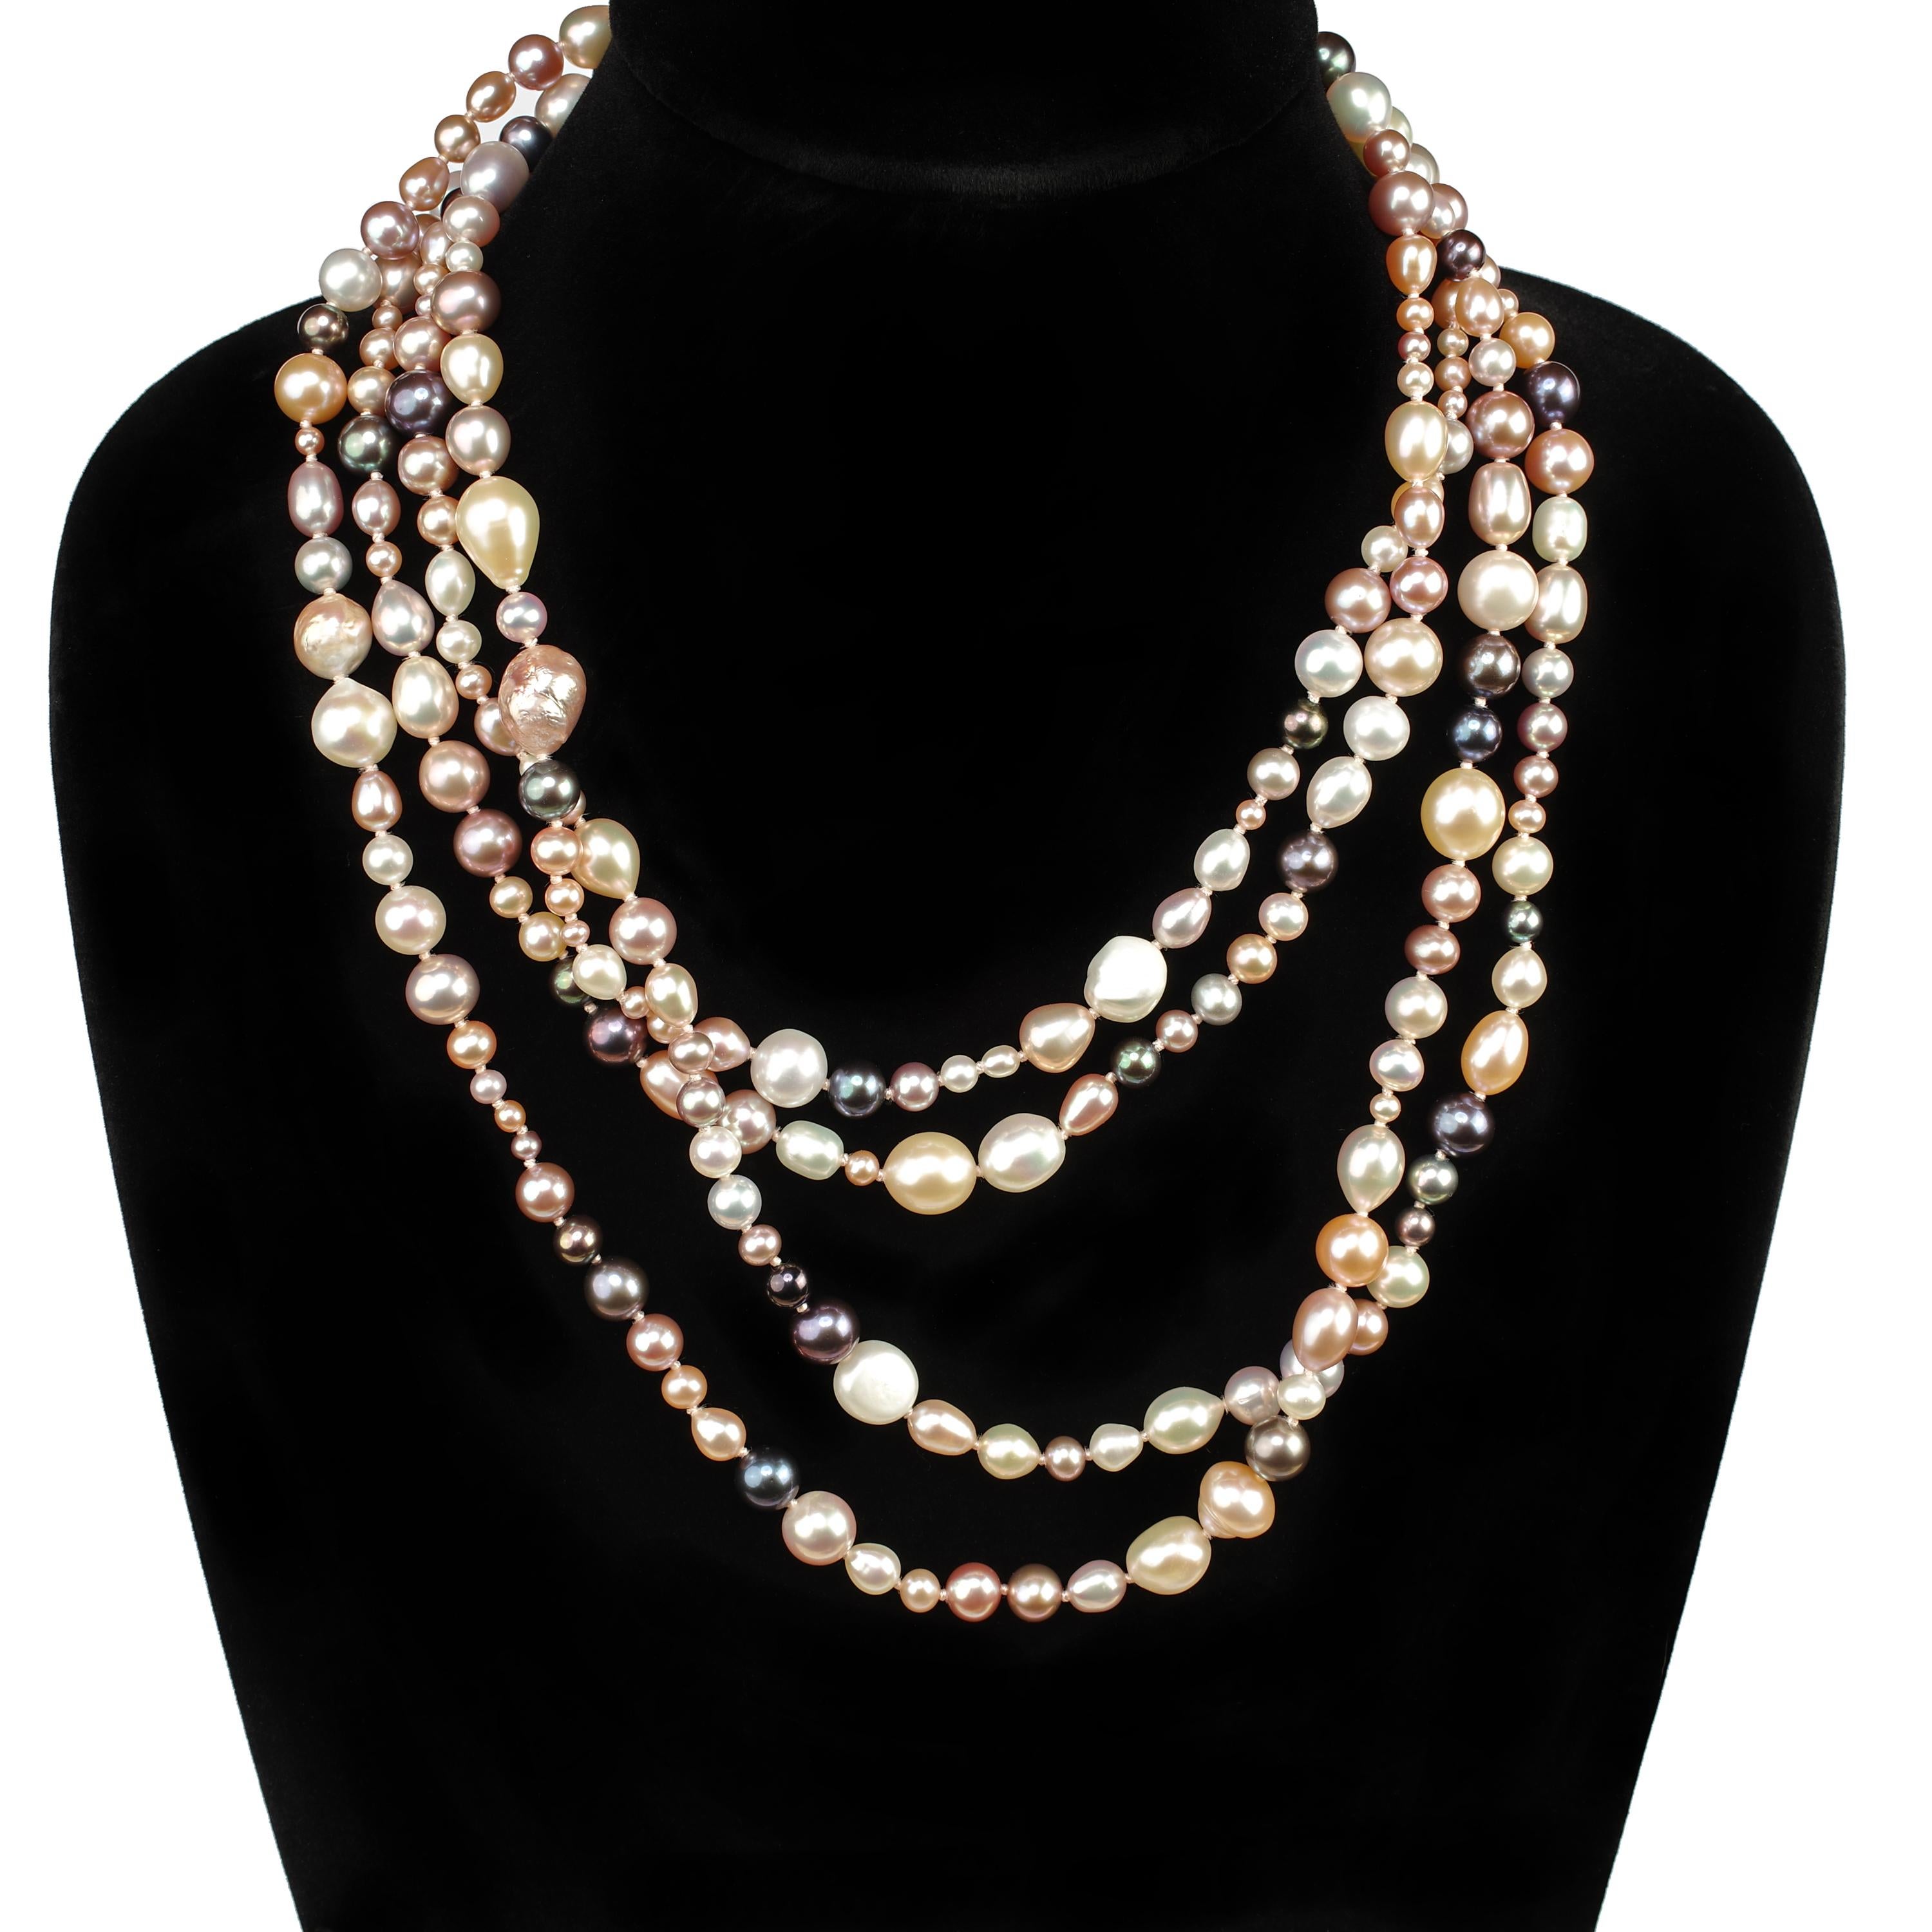 This is a dramatically spectacular and insanely, luxuriously long (over 7 foot) strand of naturally-colored cultured freshwater pearls from China. The 270 brilliantly luminous, gorgeous pearls present a spectrum of the amazing colors Chinese